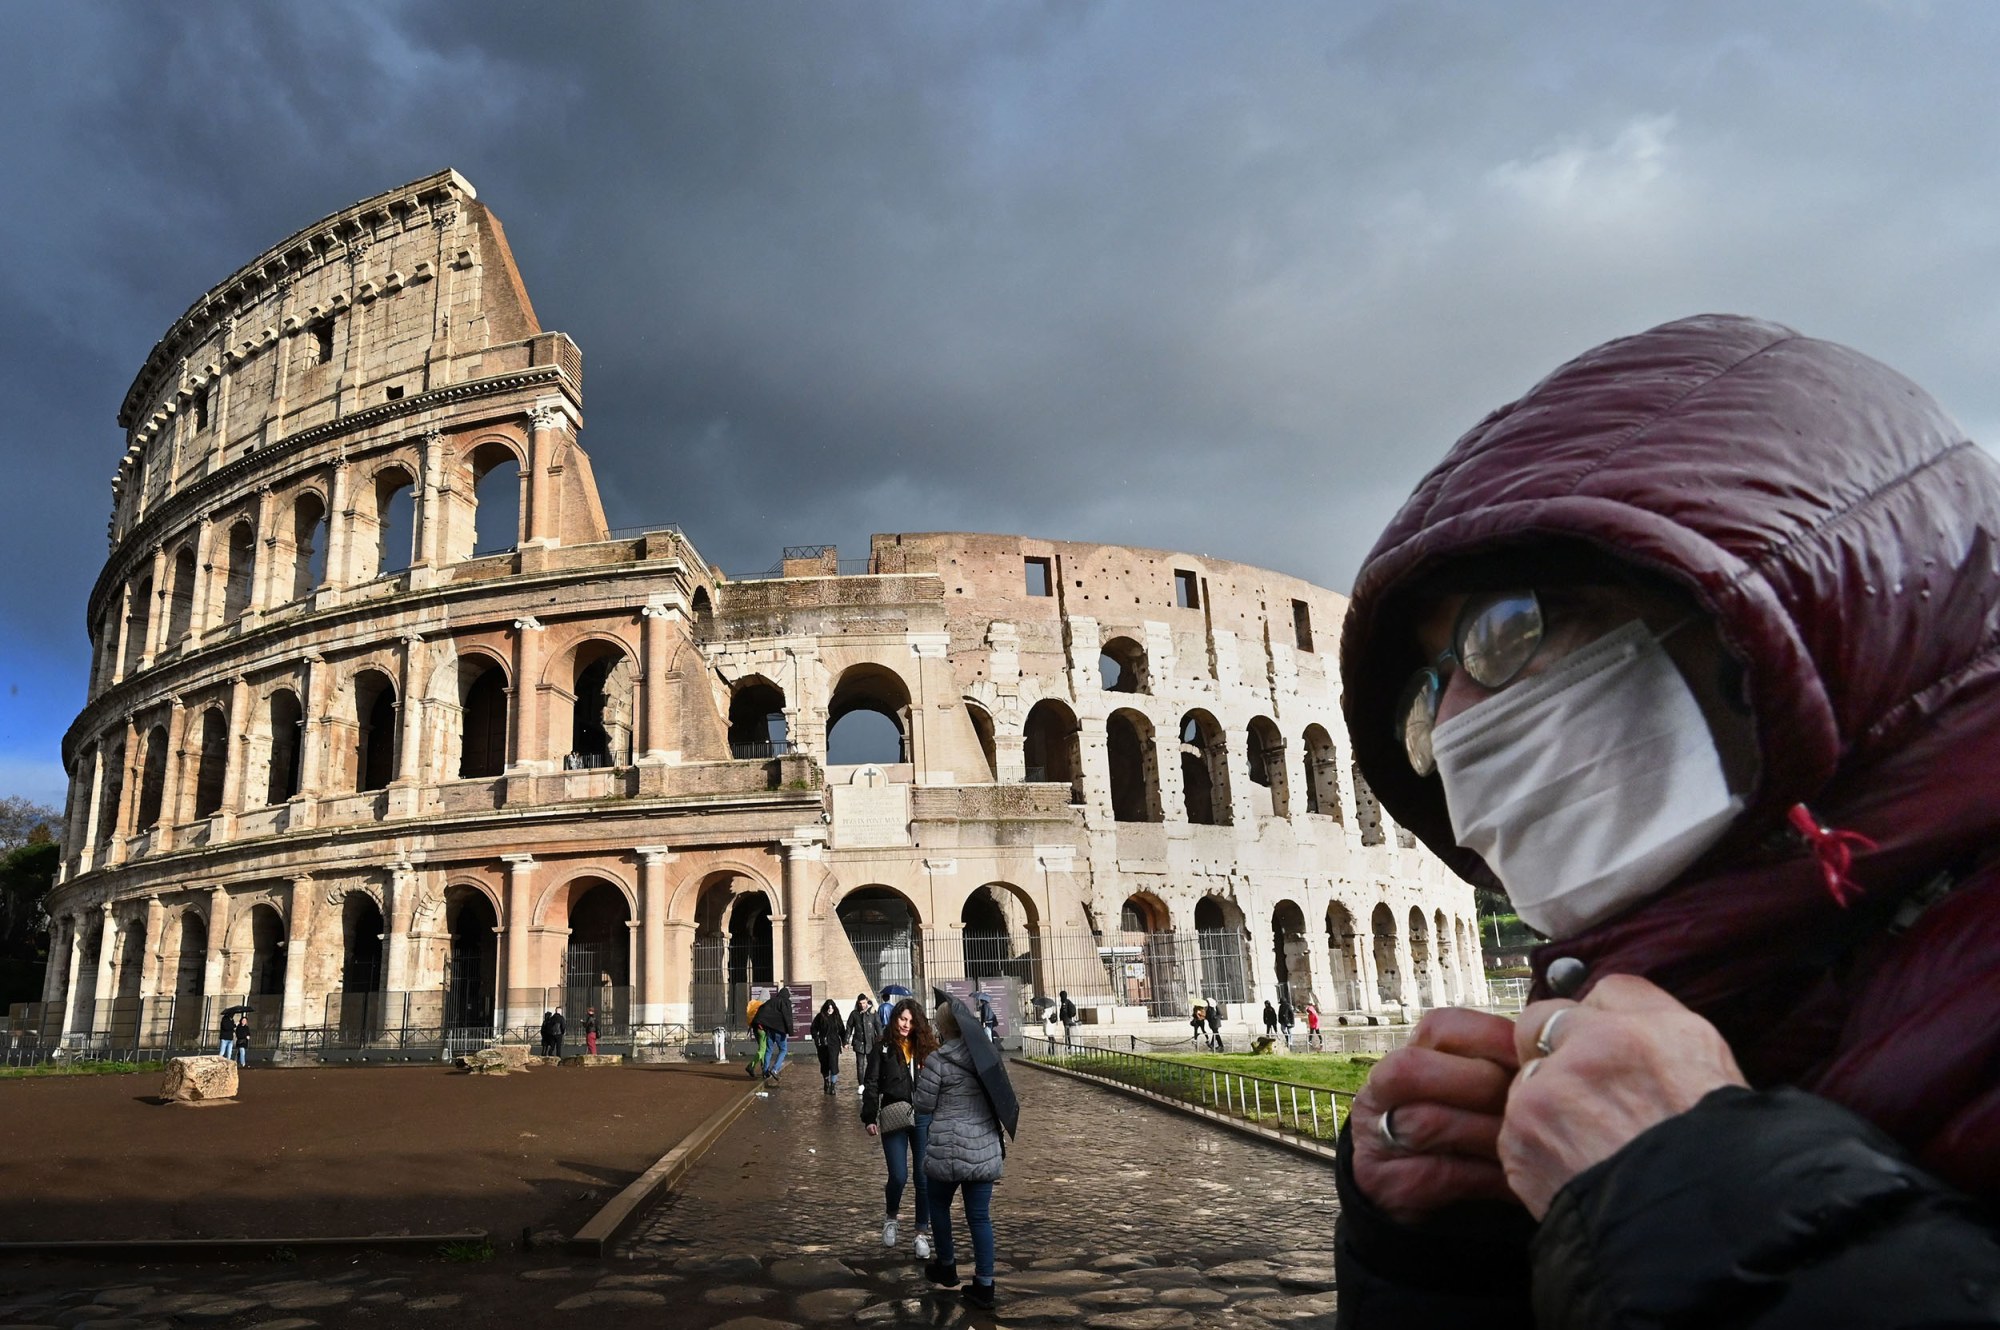 Image: A man wearing a protective mask passes by the Colosseum in Rome on March 7, 2020 amid fear of Covid-19 epidemic.